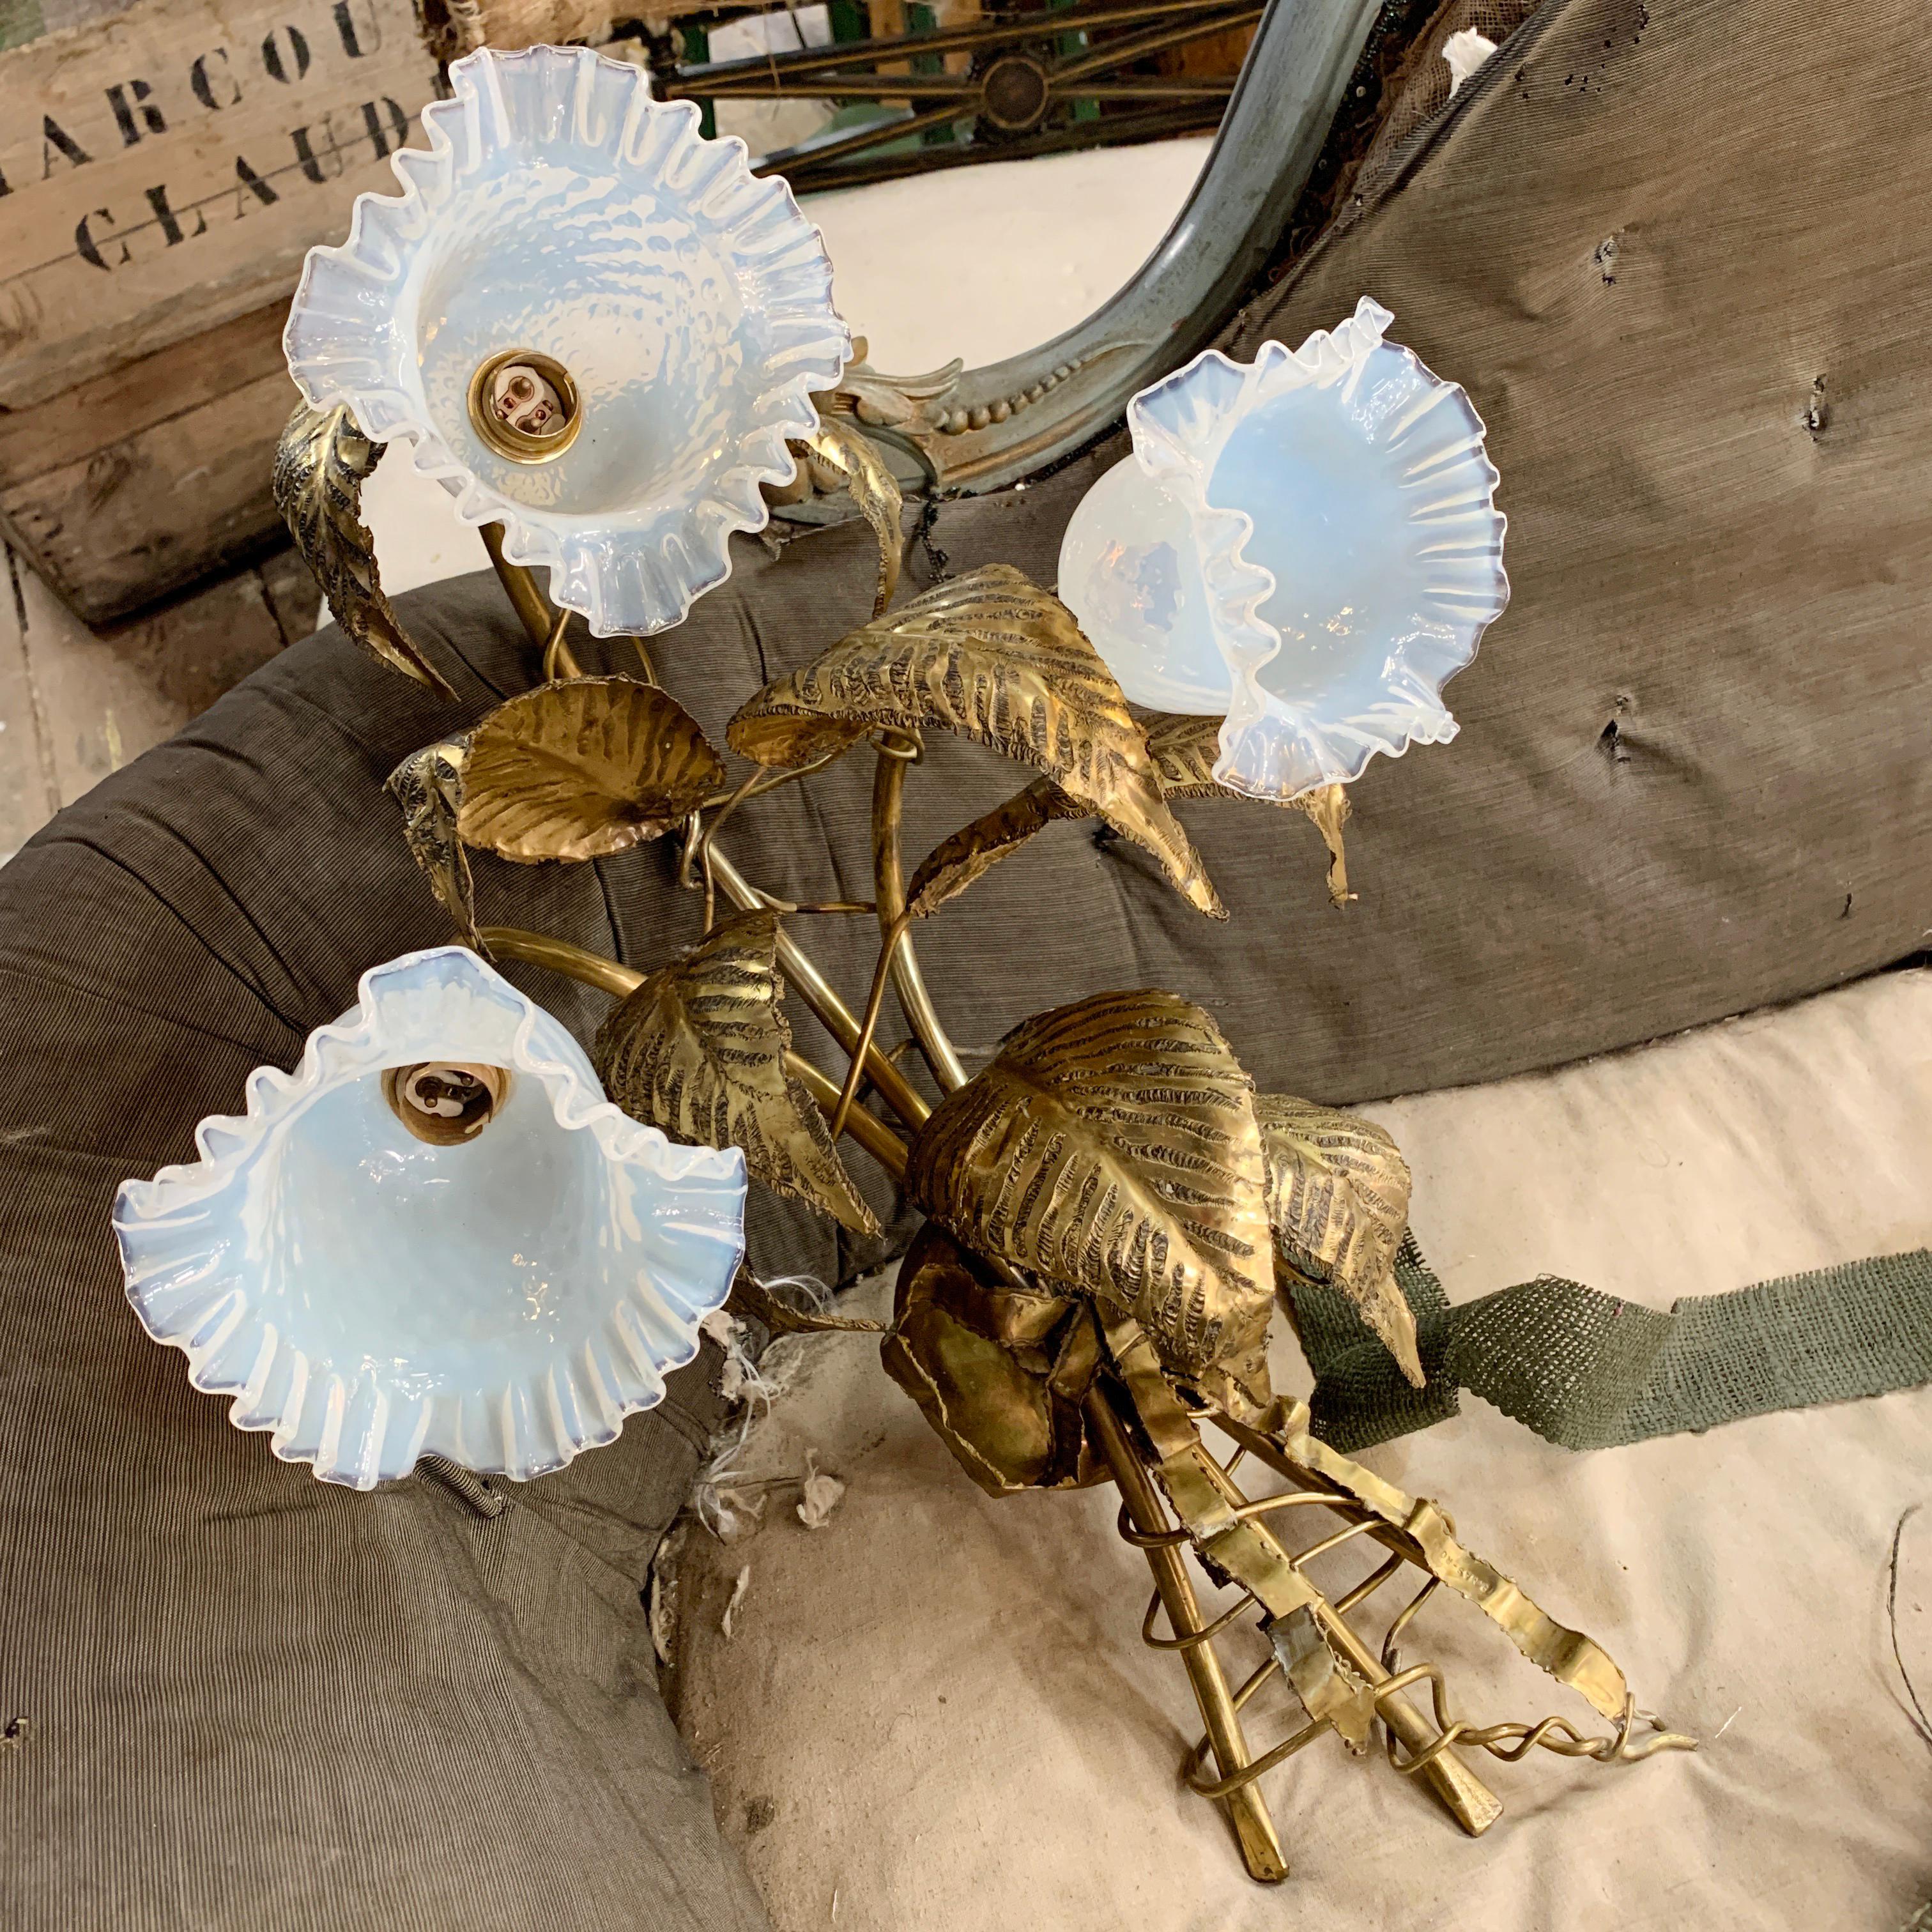 Italian brass leaves and flowers wall light by P. Mas-Rossi
The decorative iridescent Vaseline glass shades hold a bulb holder each, the shades are on long stems filled with ornately finished brass leaves
There is a brass bow at the base under the